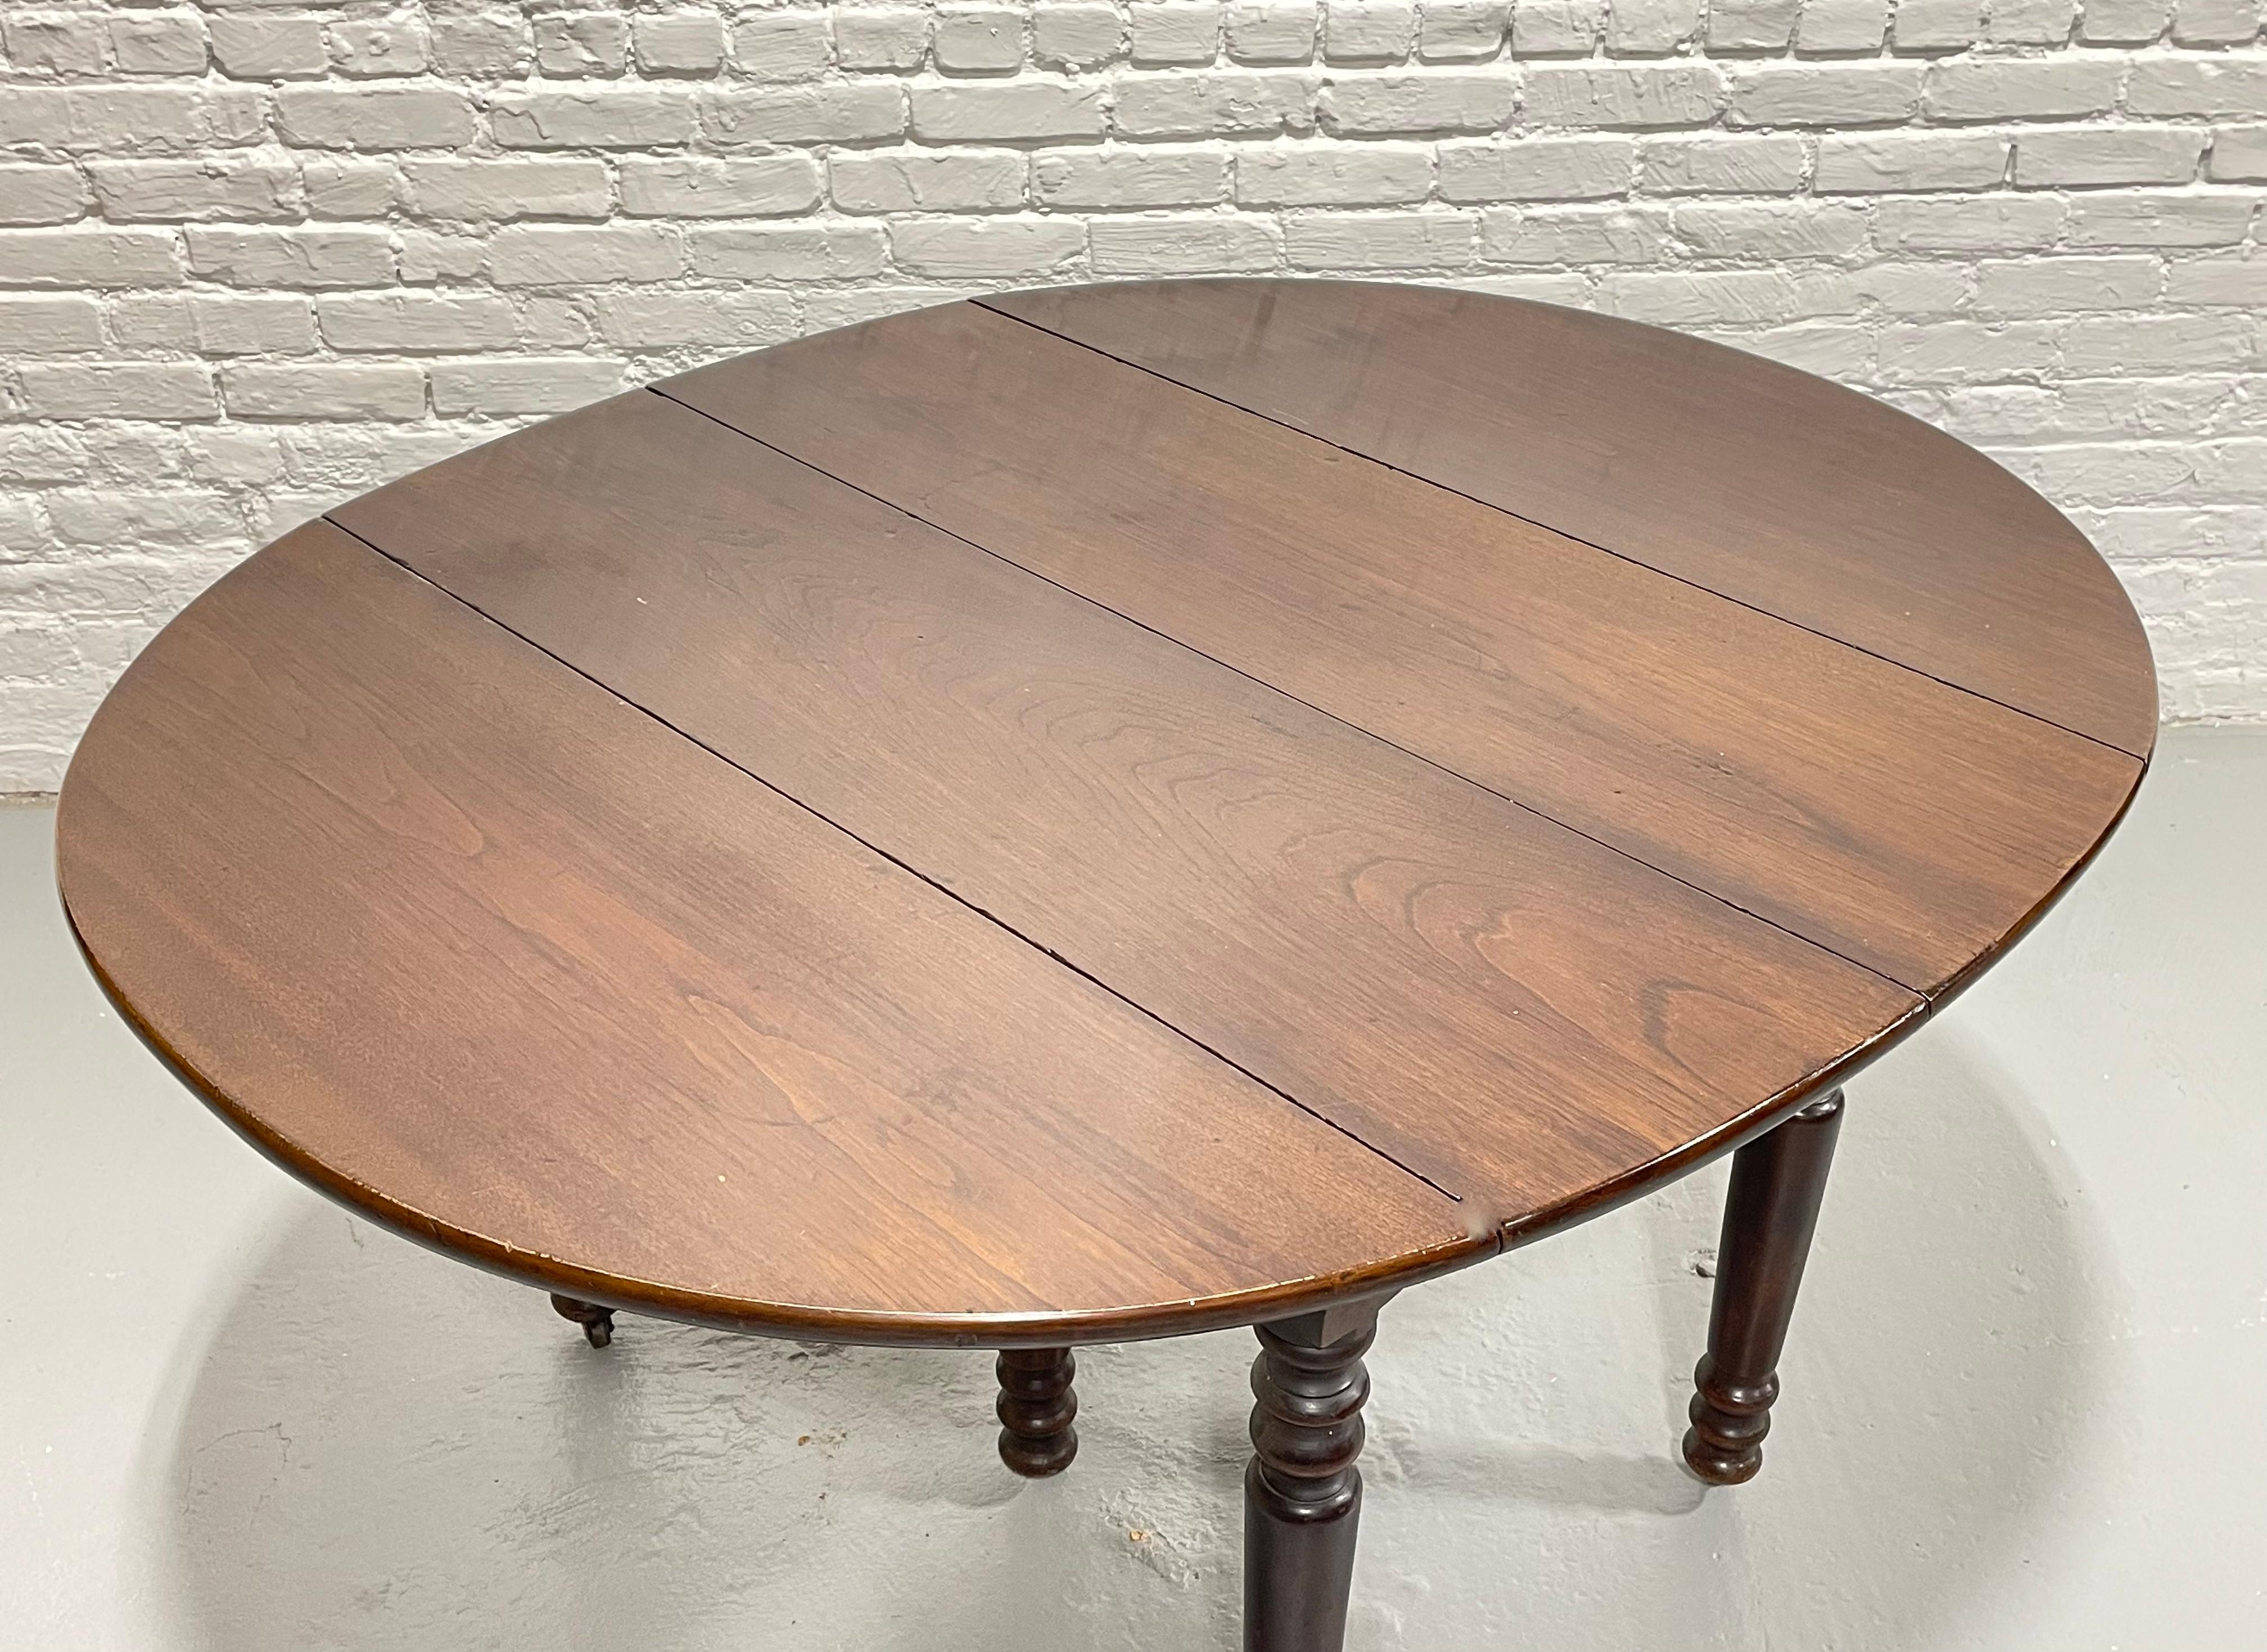 Antique Drop Leaf Expandable Mahogany Oval Dining Table, c. 1910 For Sale 1